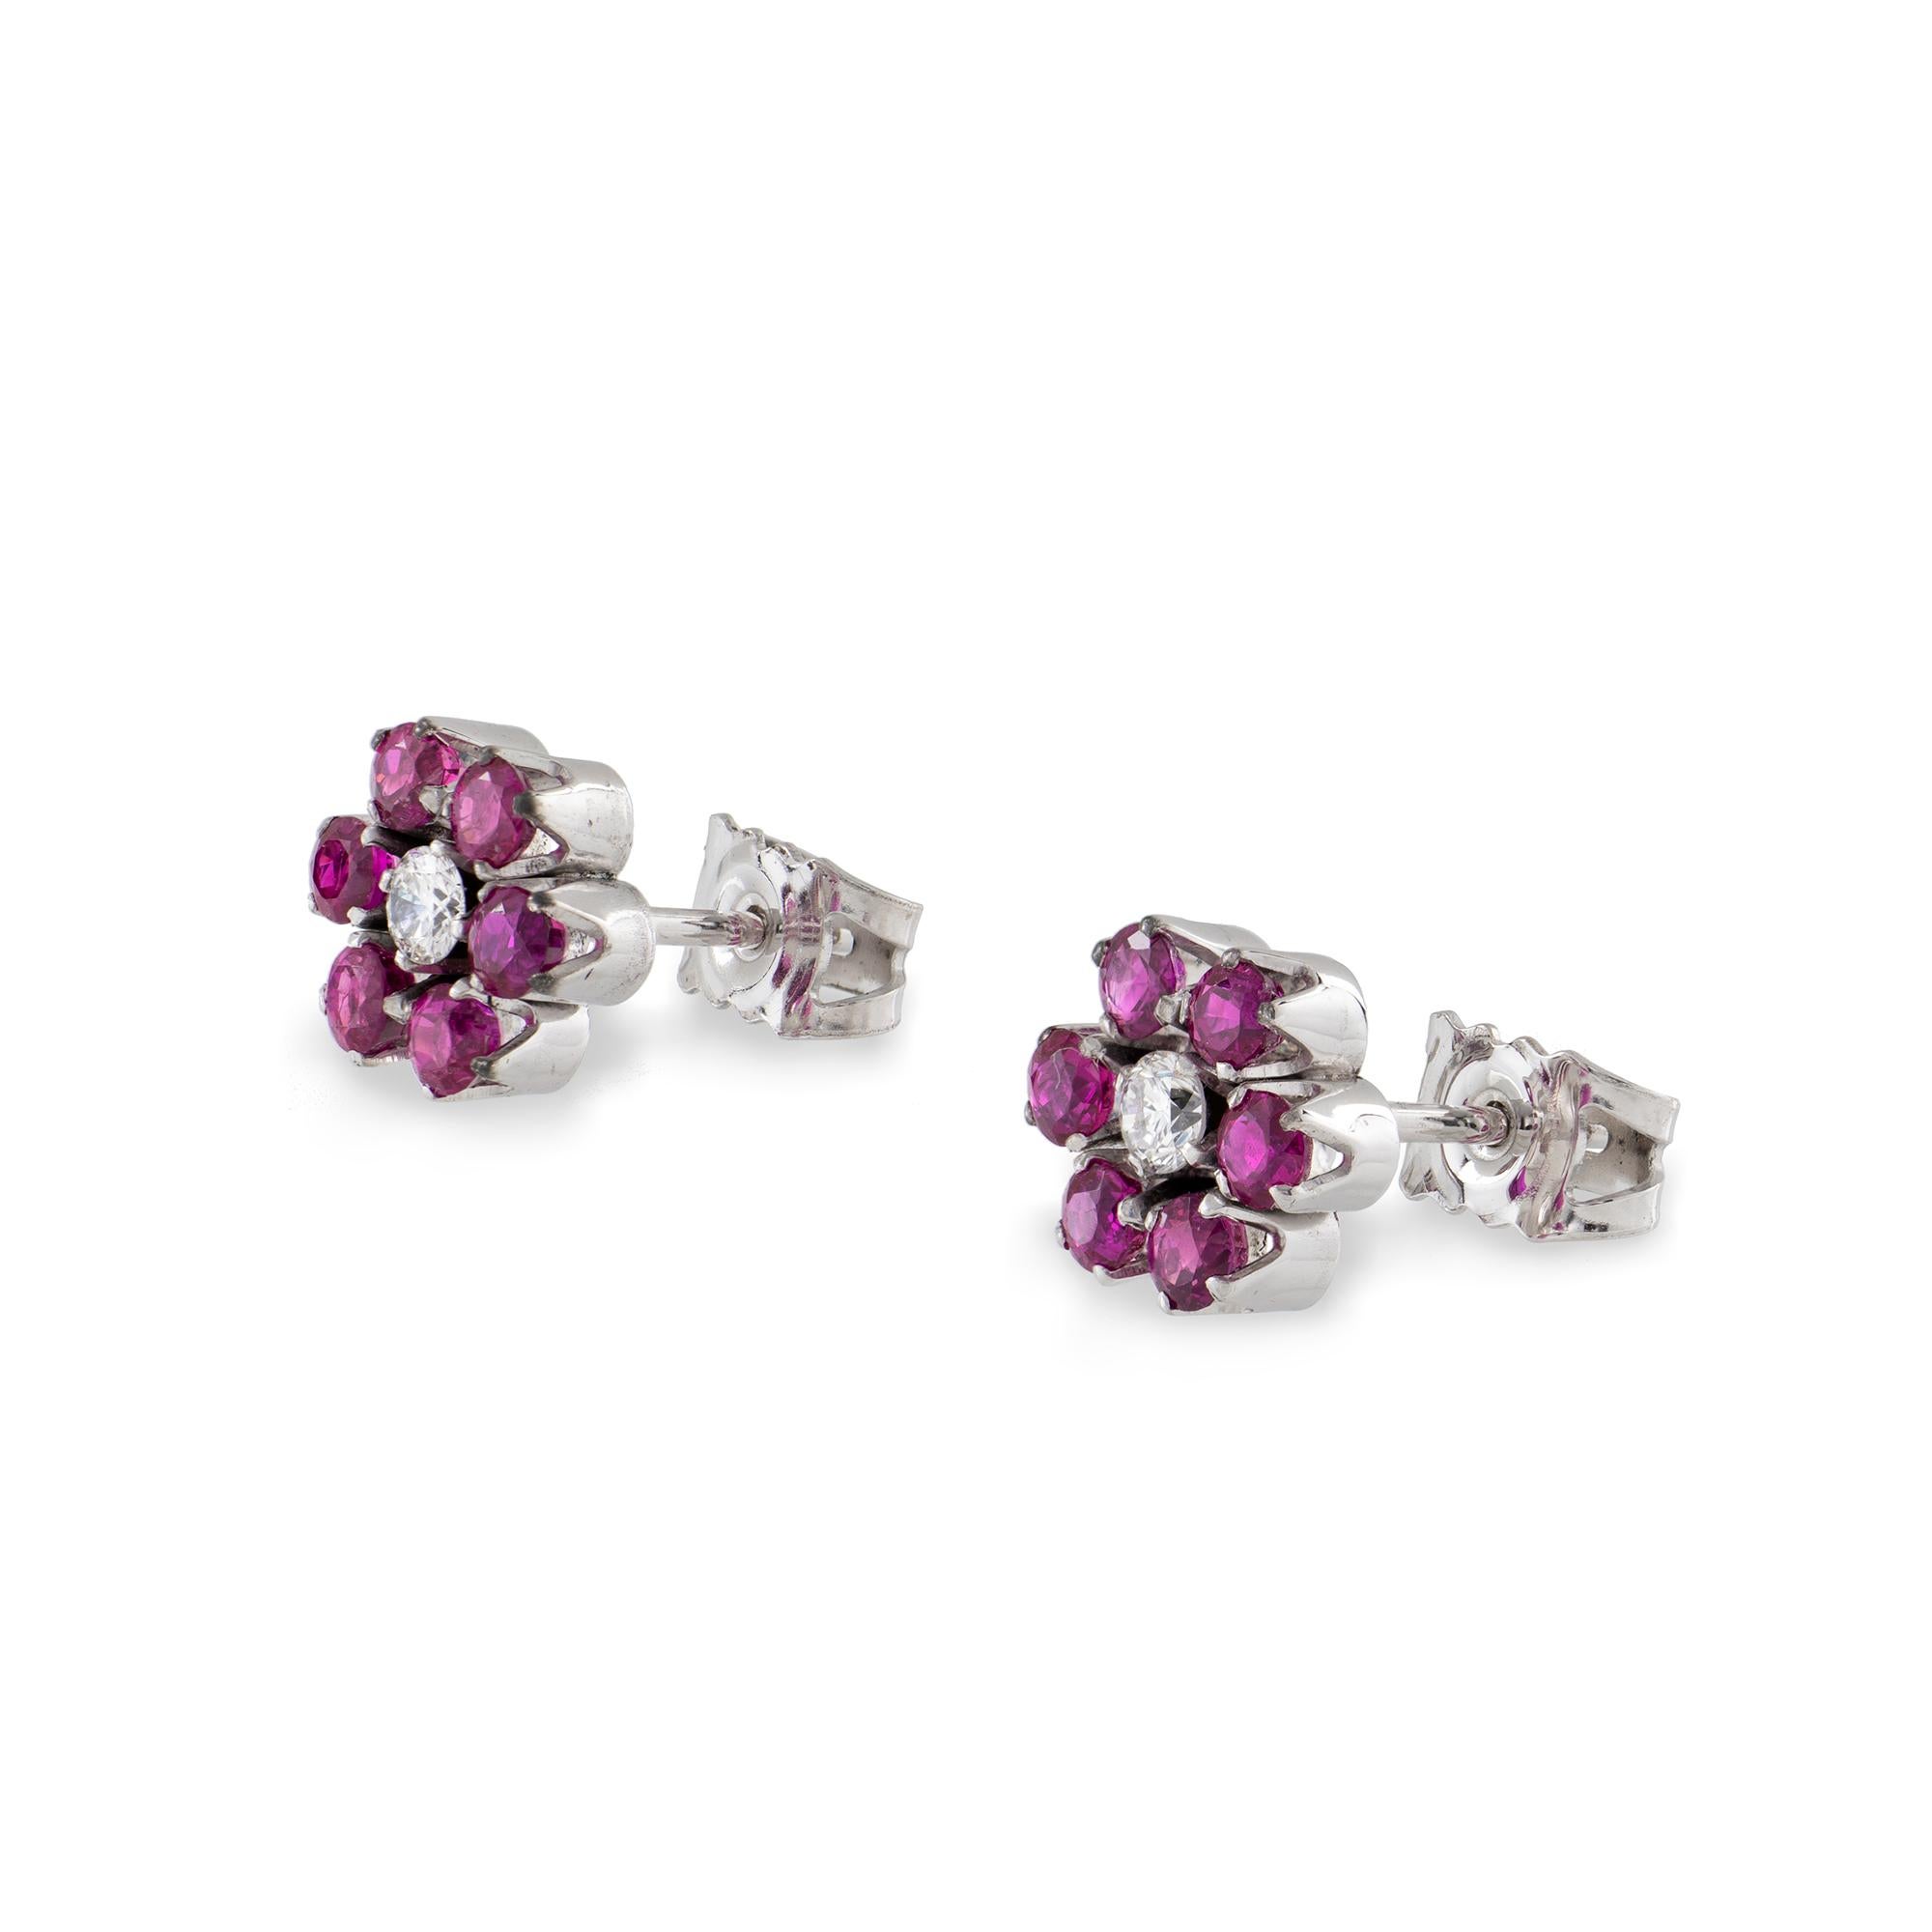 A pair of ruby and diamond floral cluster stud earrings, each set to the centre with a round brilliant cut diamond, estimated to weigh 0.20 carats in total, and surrounded by six round faceted rubies, estimated to weigh 0.80 carats in total, all